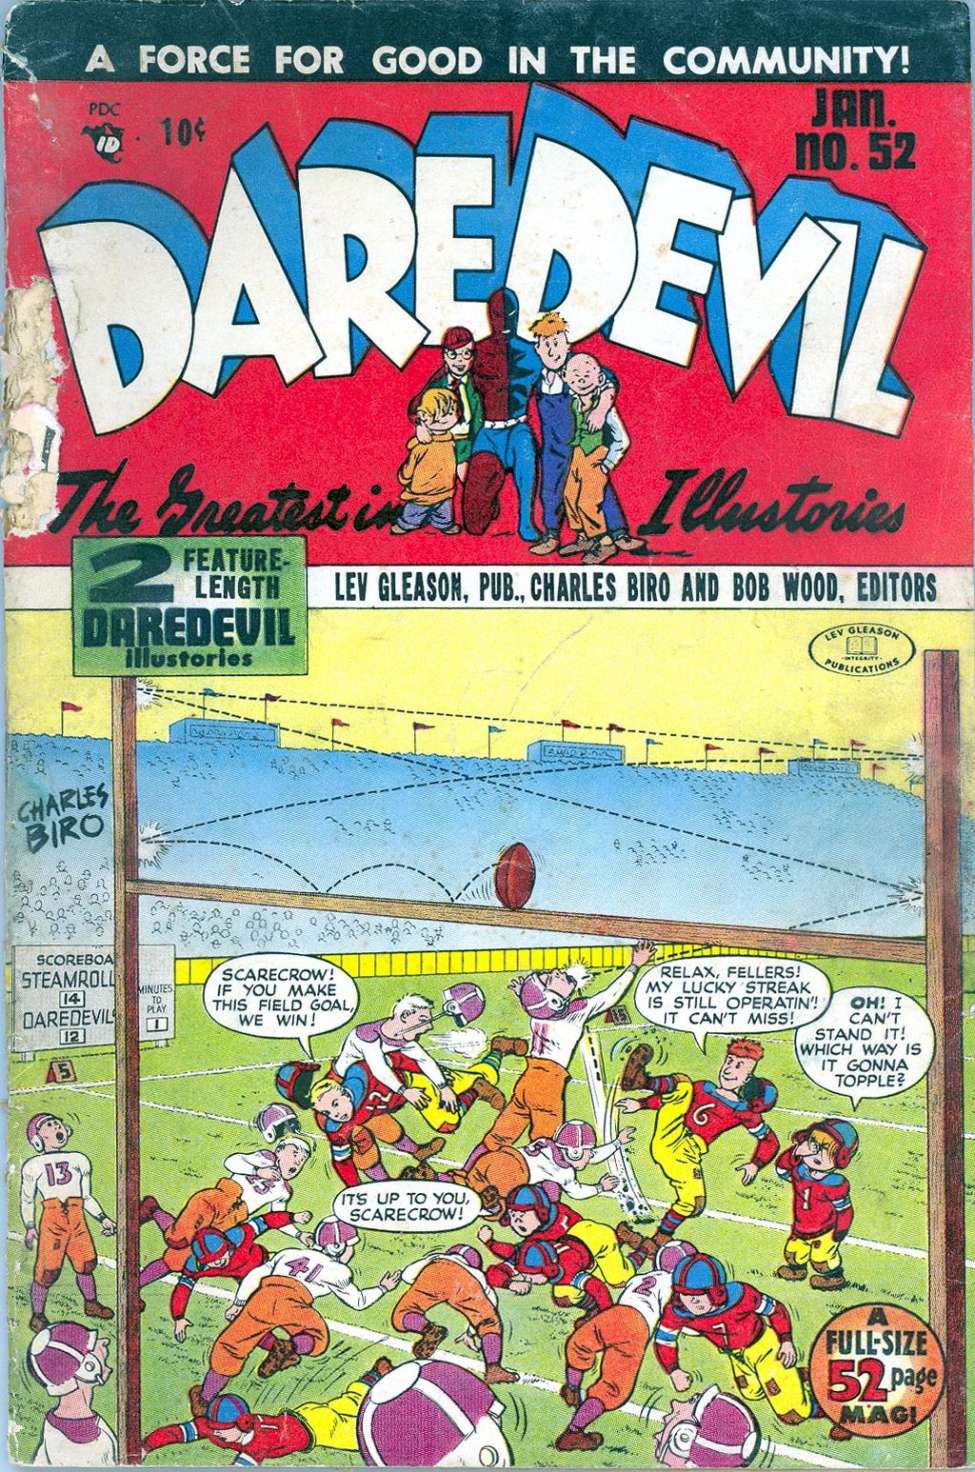 Book Cover For Daredevil - The Complete Archive Part 5